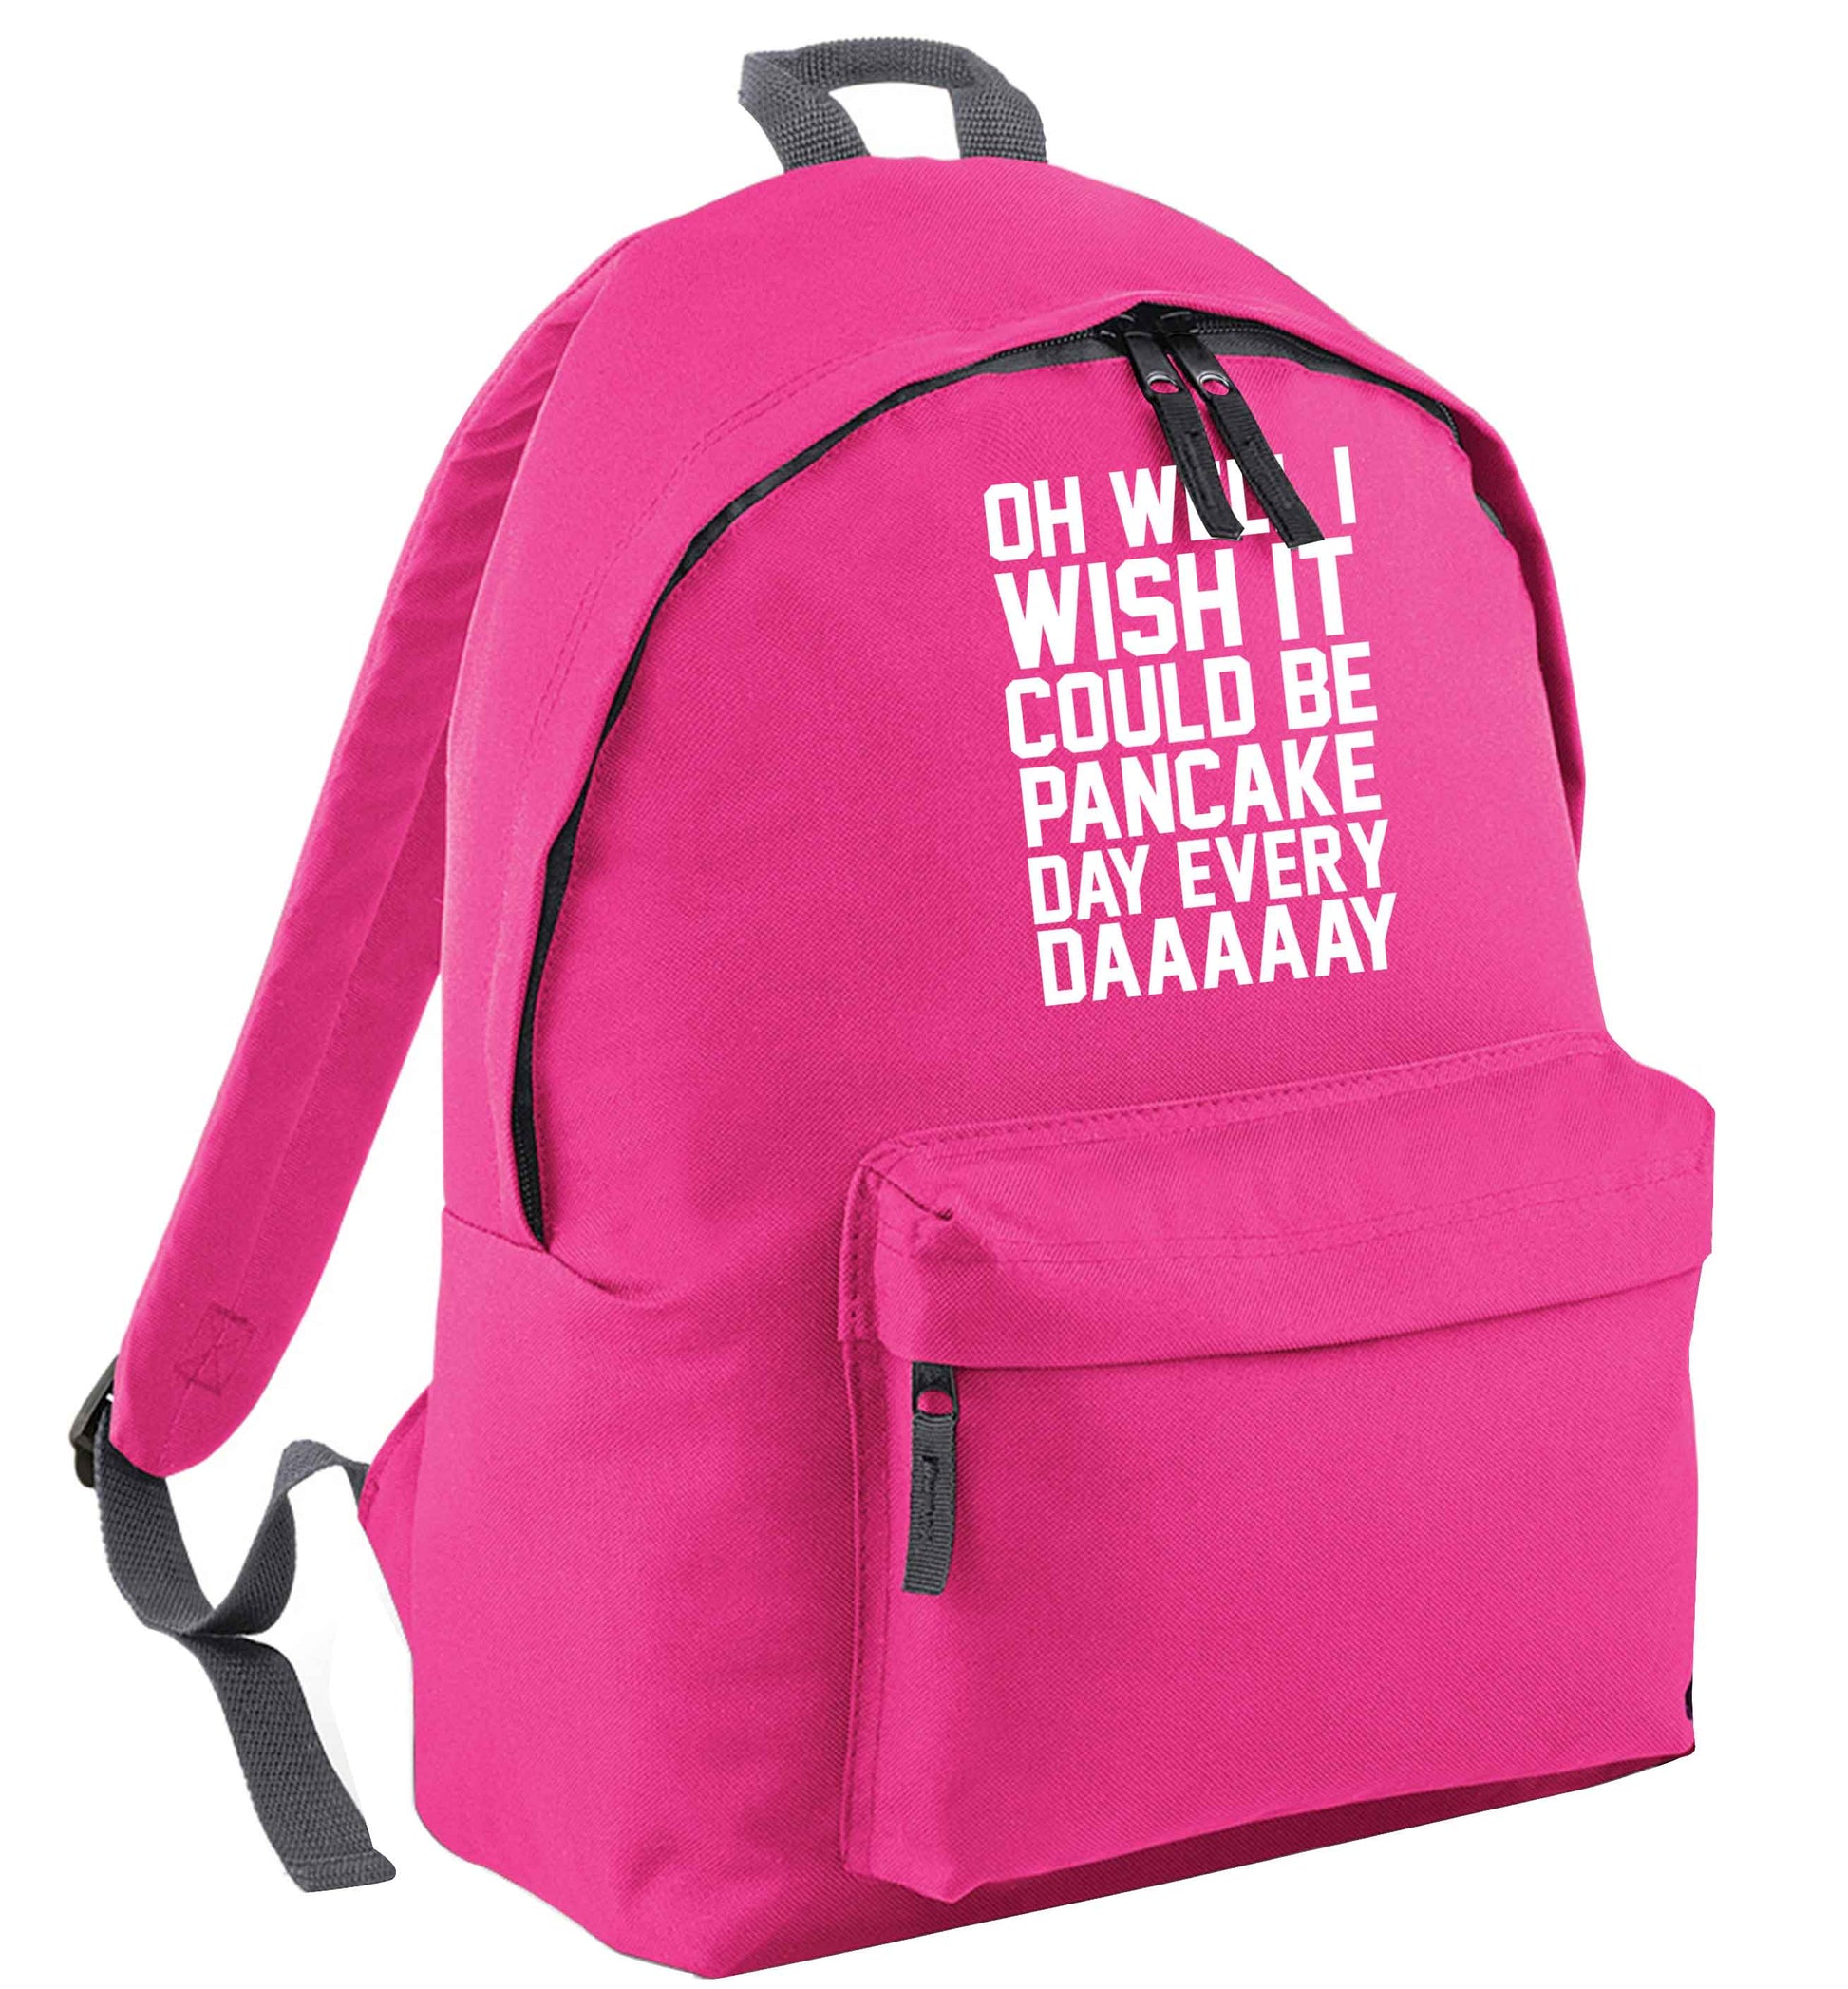 Oh well I wish it could be pancake day every day pink adults backpack